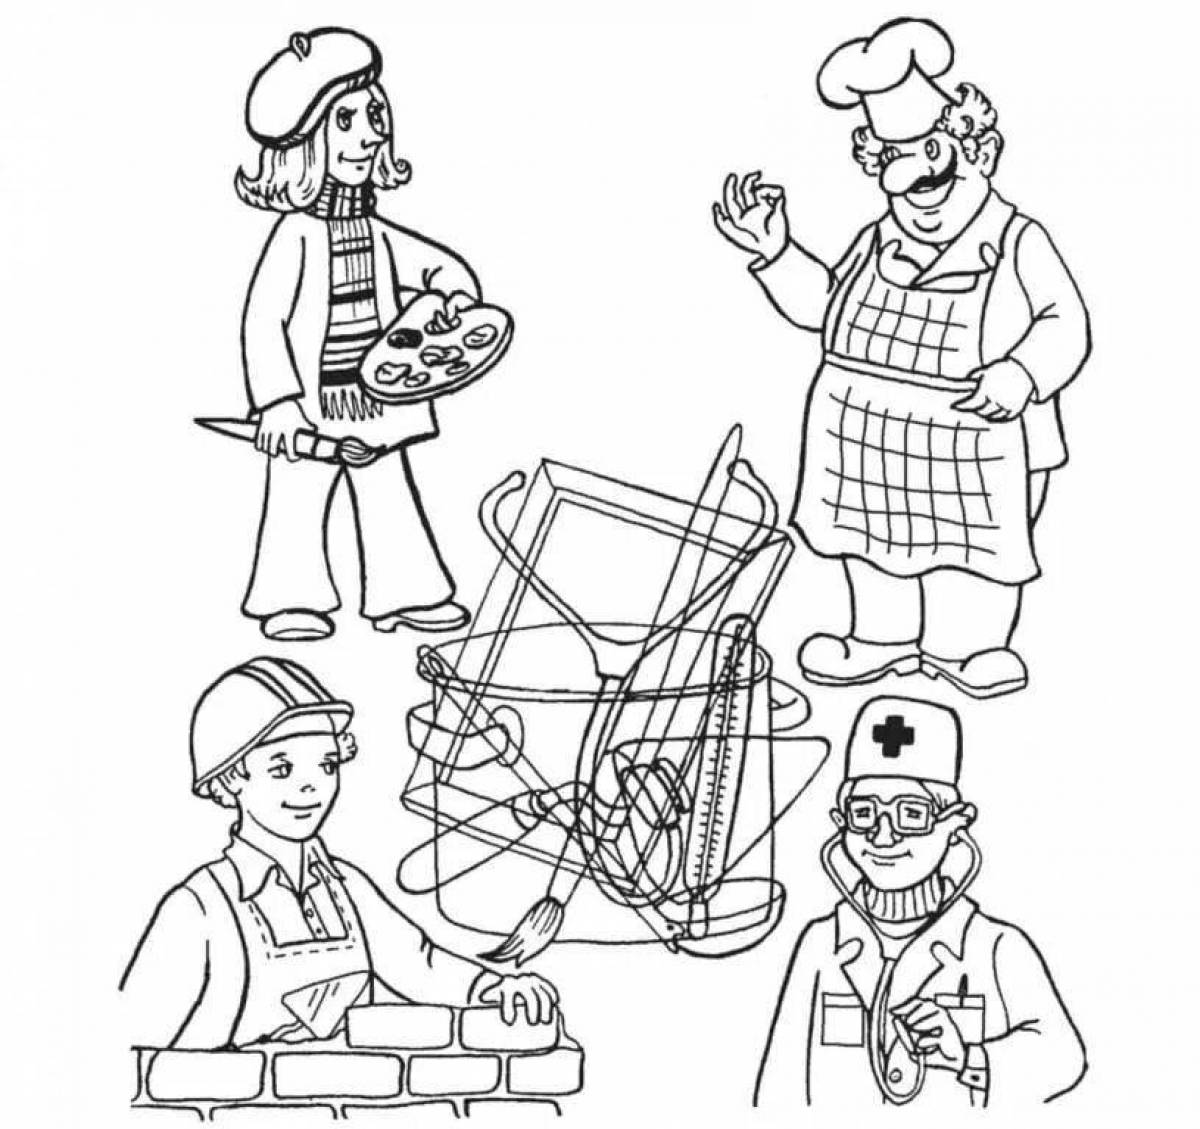 Funny coloring pages of professions middle group